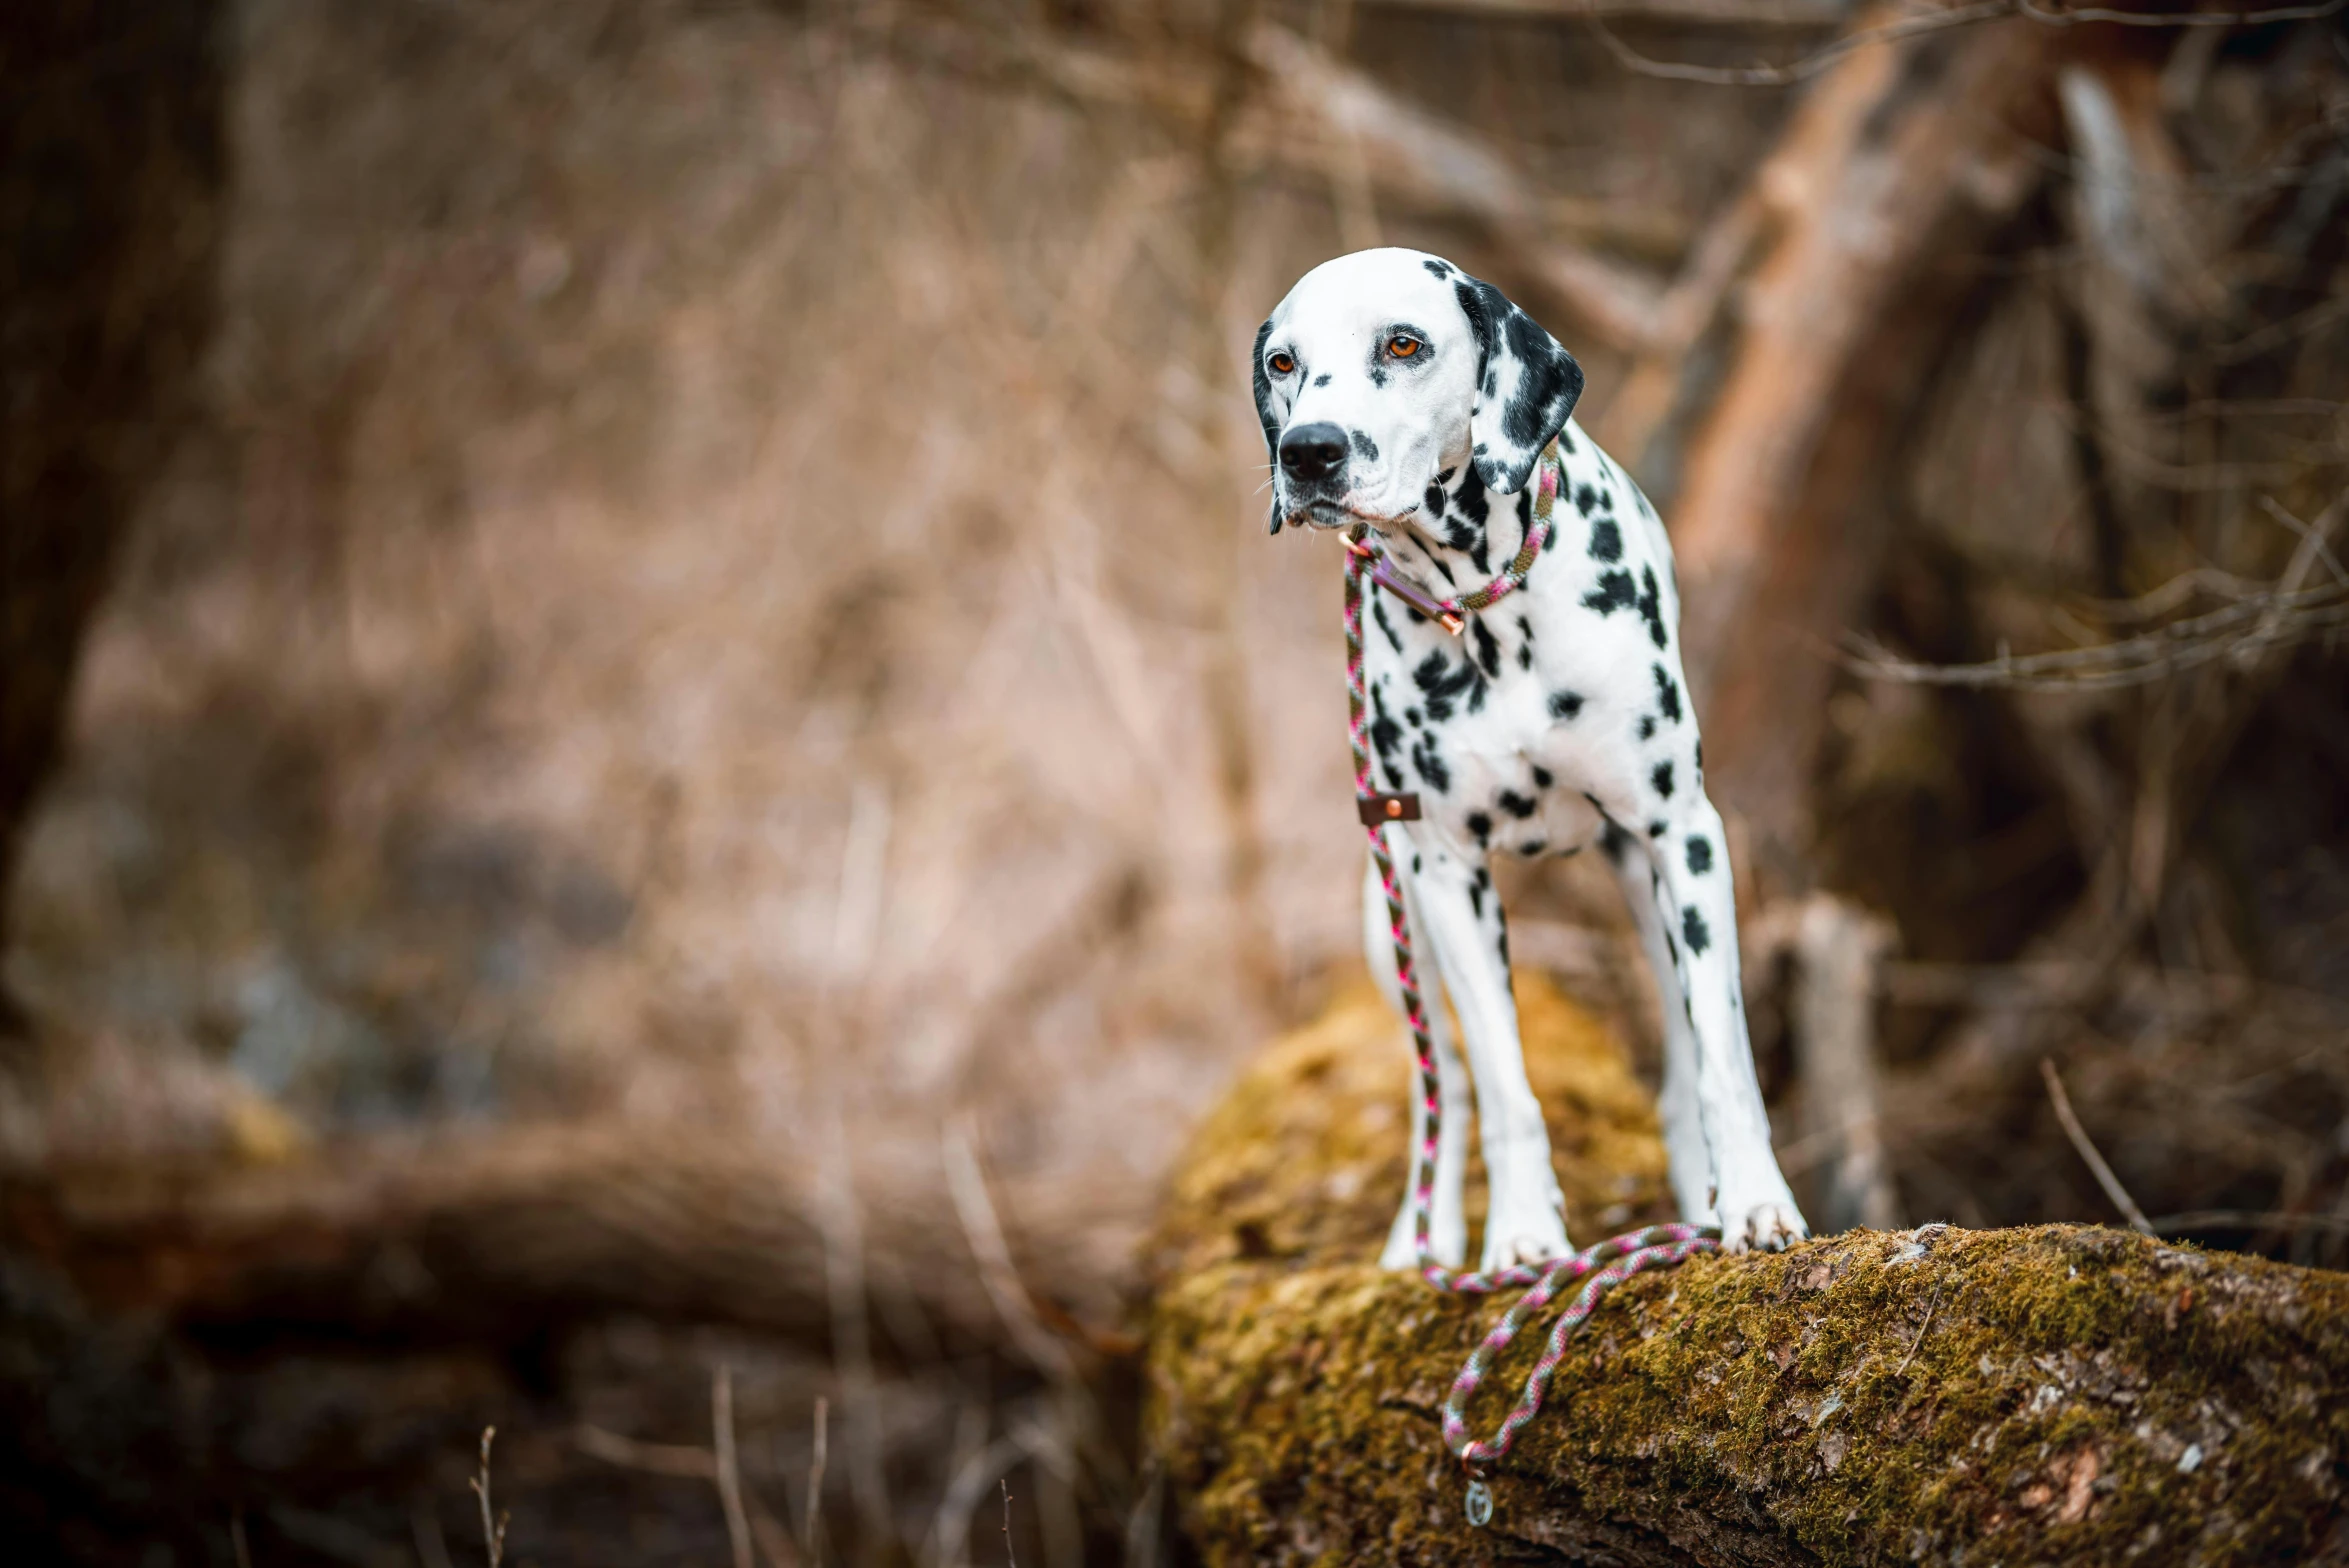 the dalmatian is standing on a rock with rope